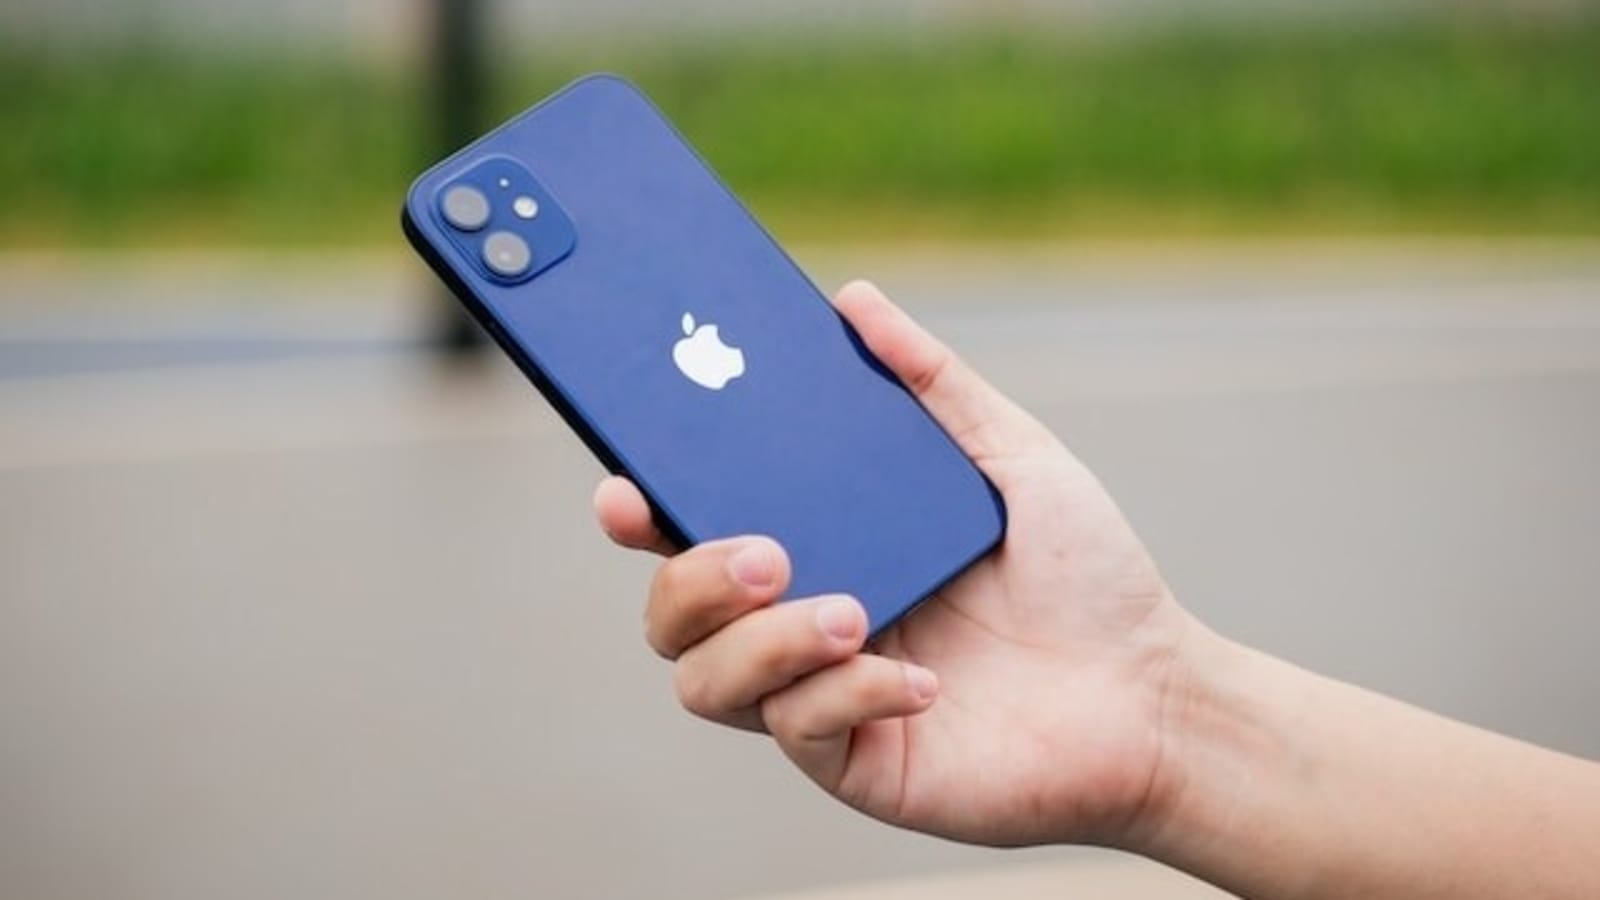 Buying an Apple iPhone 12? Stop! Check this out first